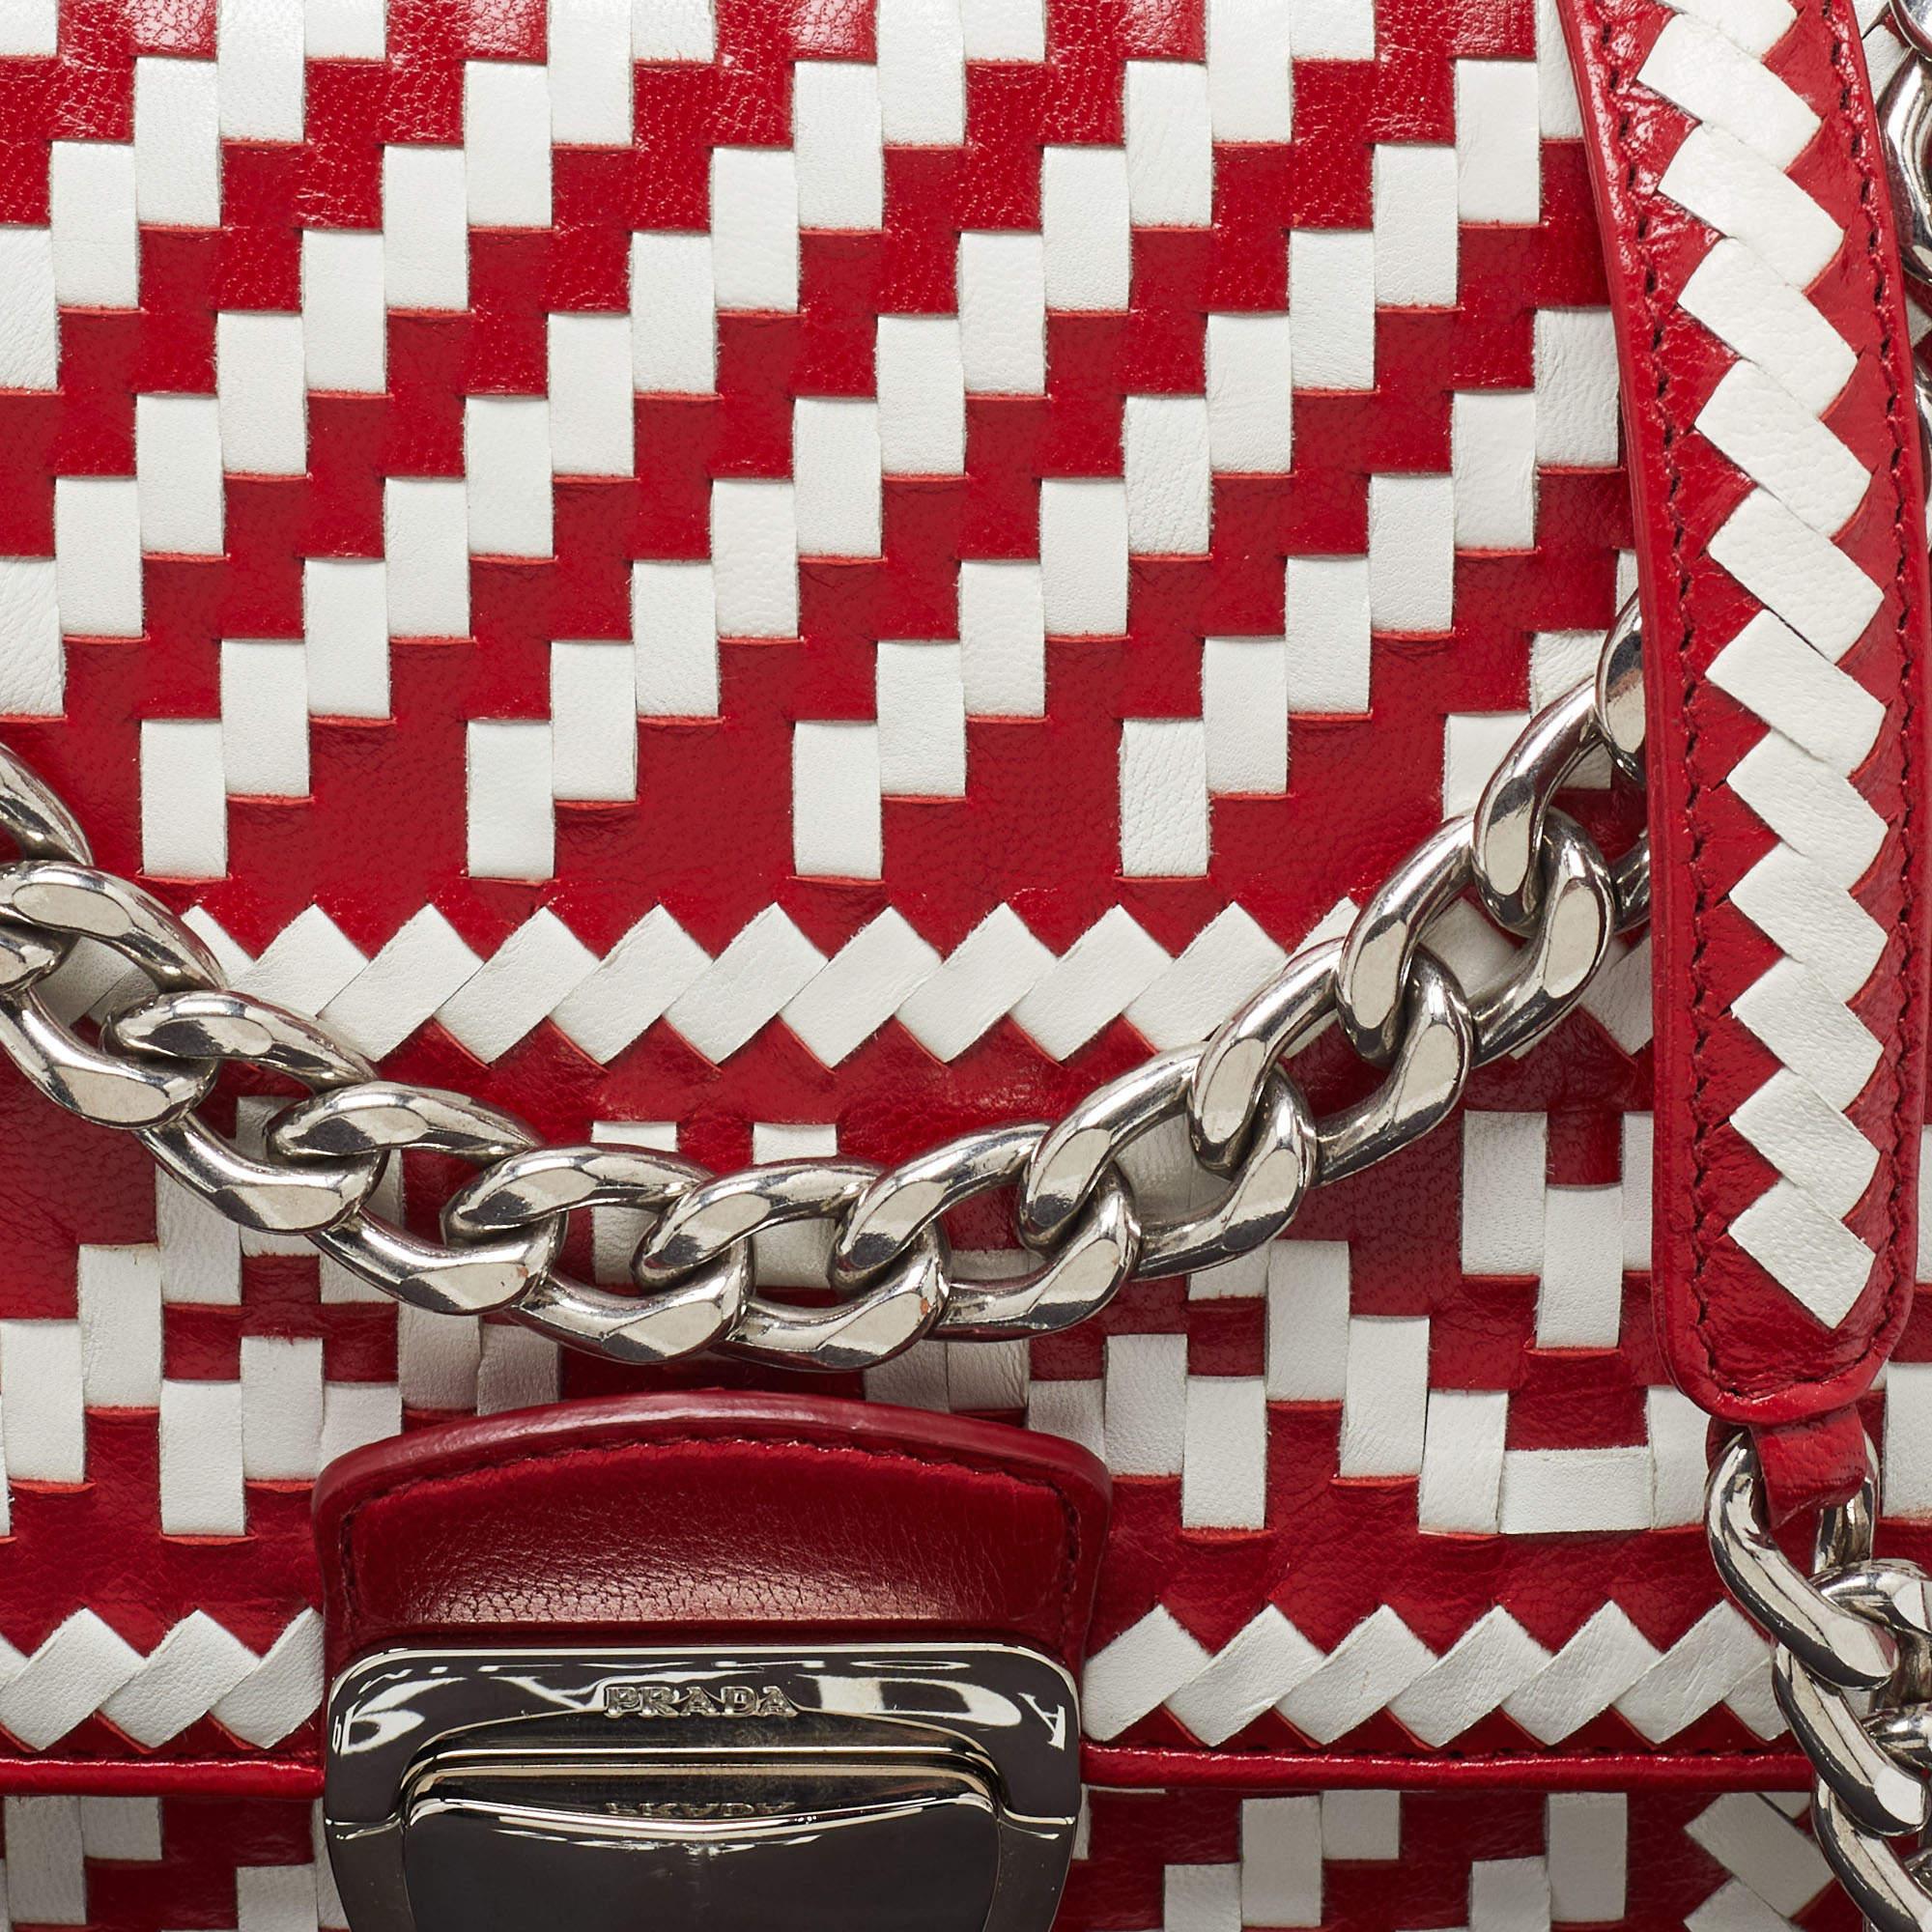 Prada Red/White Madras Woven Leather Pushlock Flap Bag For Sale 8